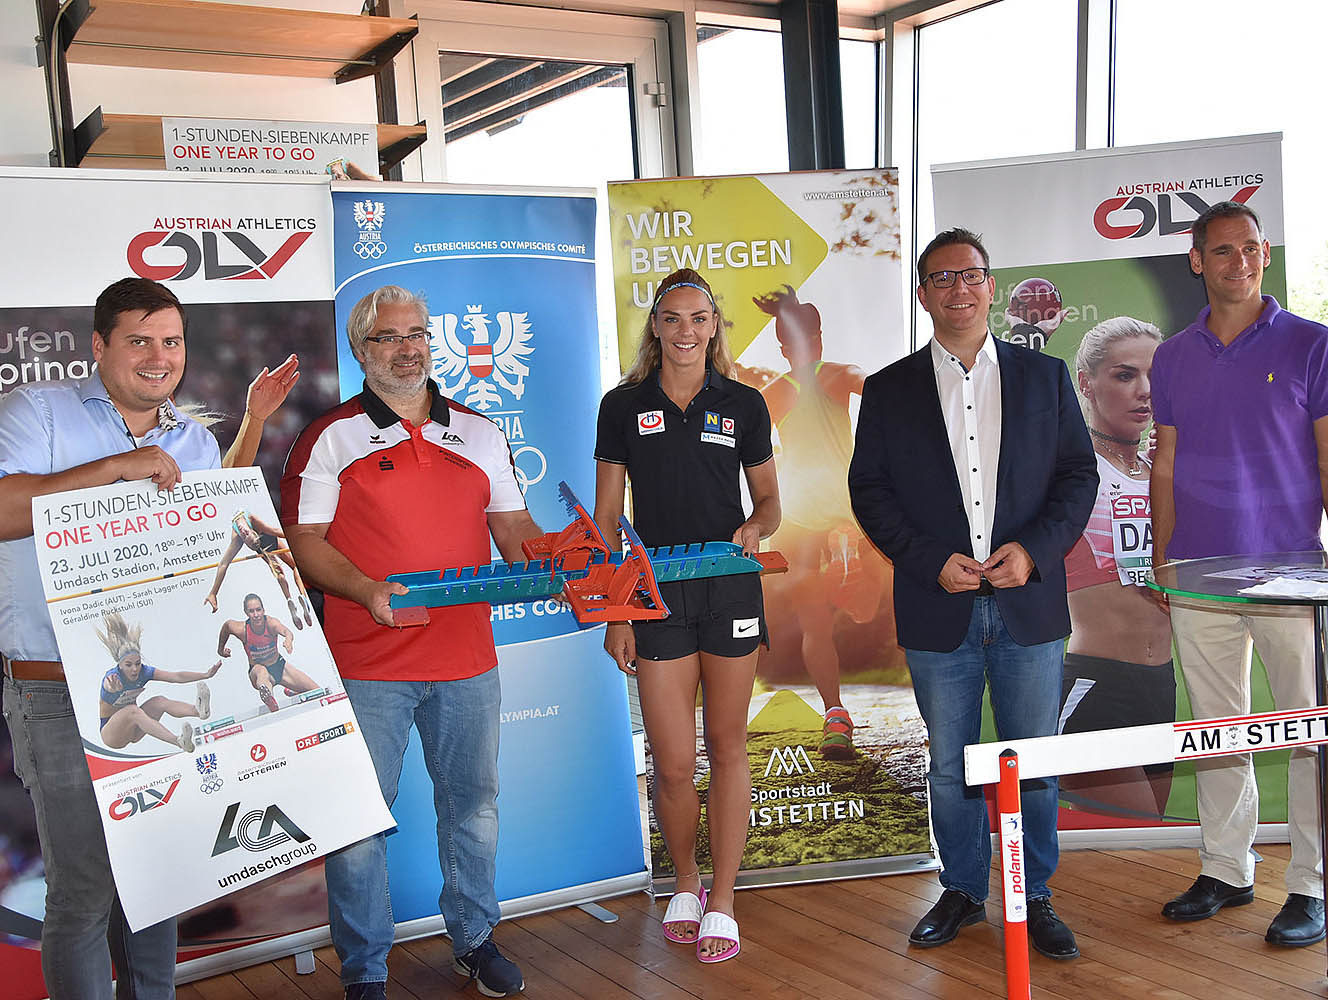 Austrian NOC will celebrate Tokyo 2020 one year to go with ...